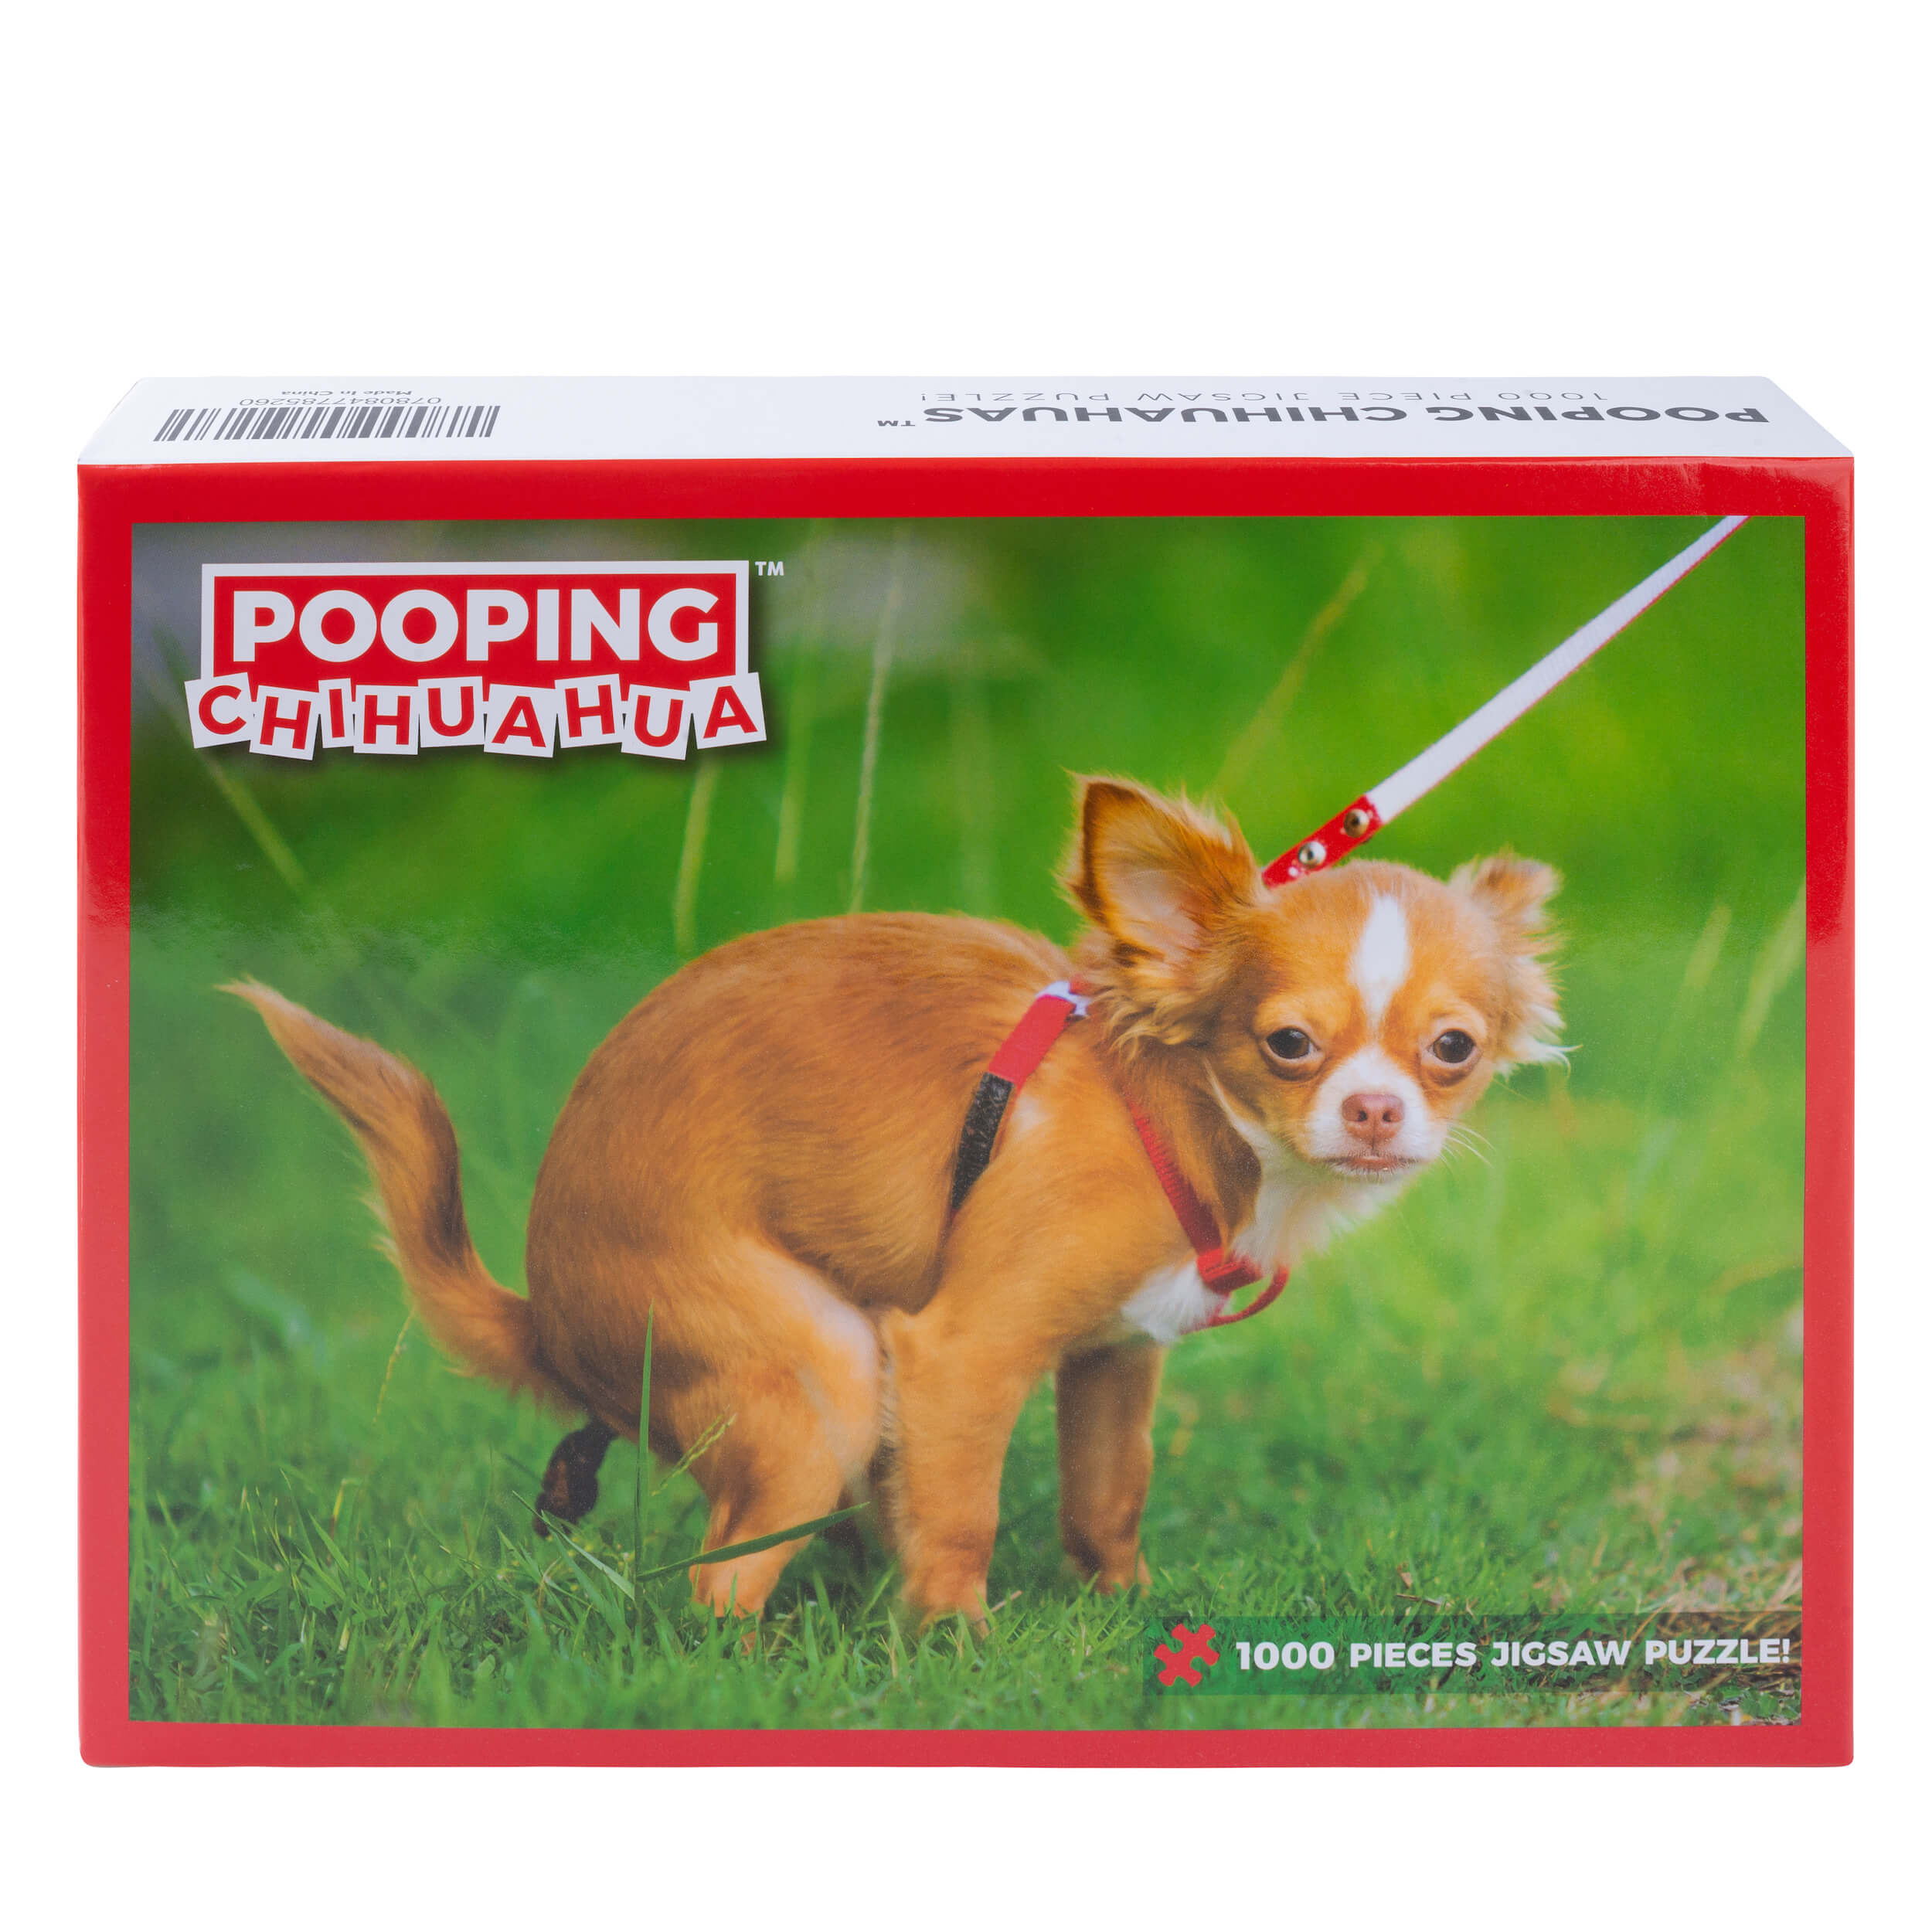 Pooping Dogs Puzzles 1000 Piece for Adults, Animal Jigsaw Puzzles 1000  Pieces, Funny Puppy Puzzles Prank Puzzle Dog Pooping - Yahoo Shopping